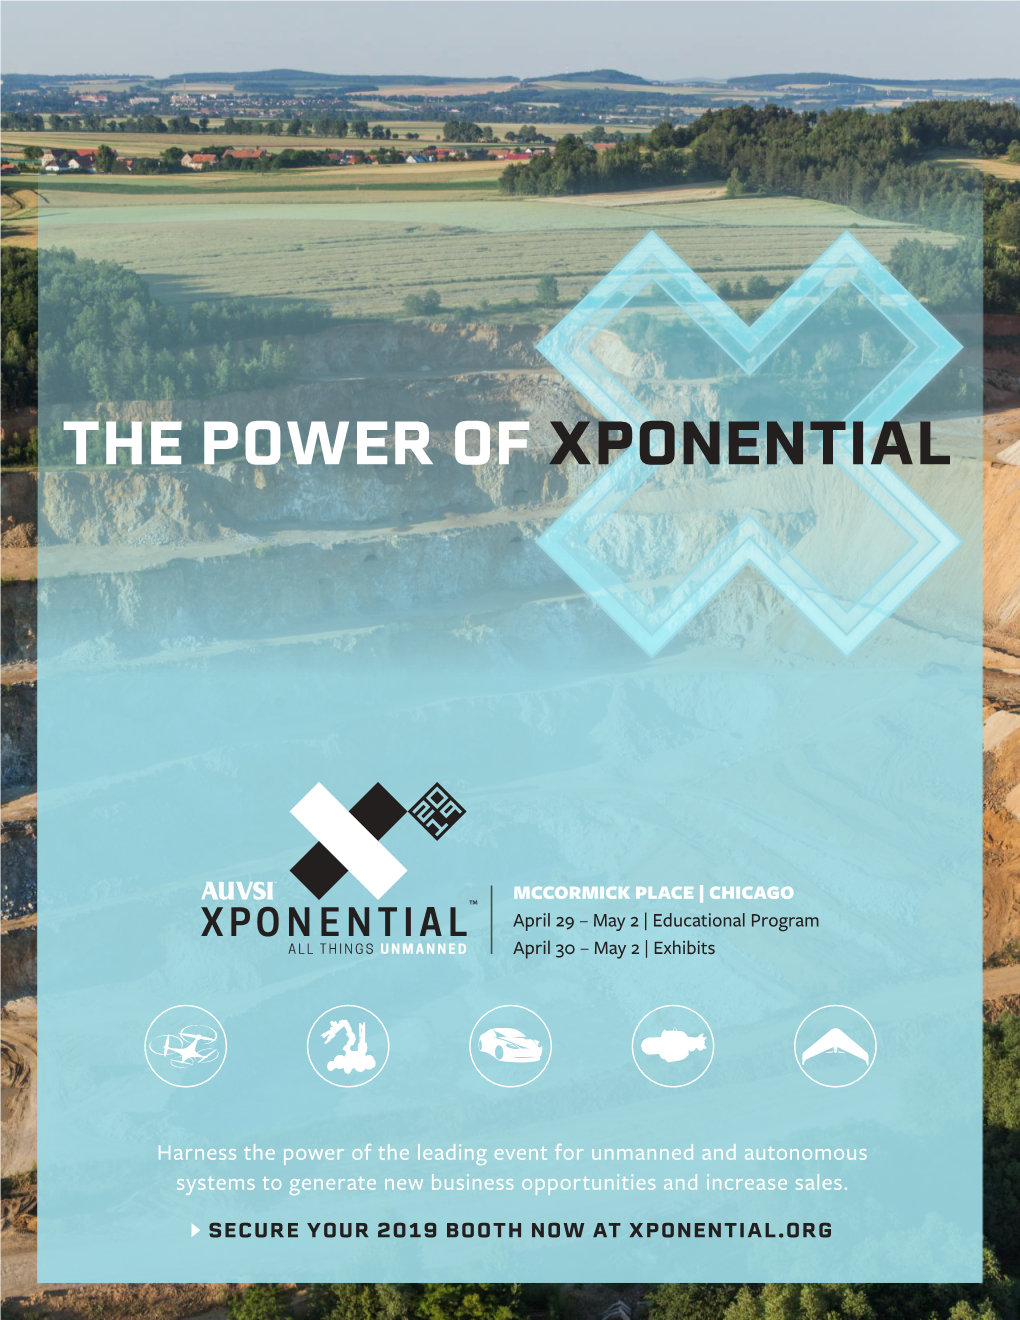 The Power of Xponential